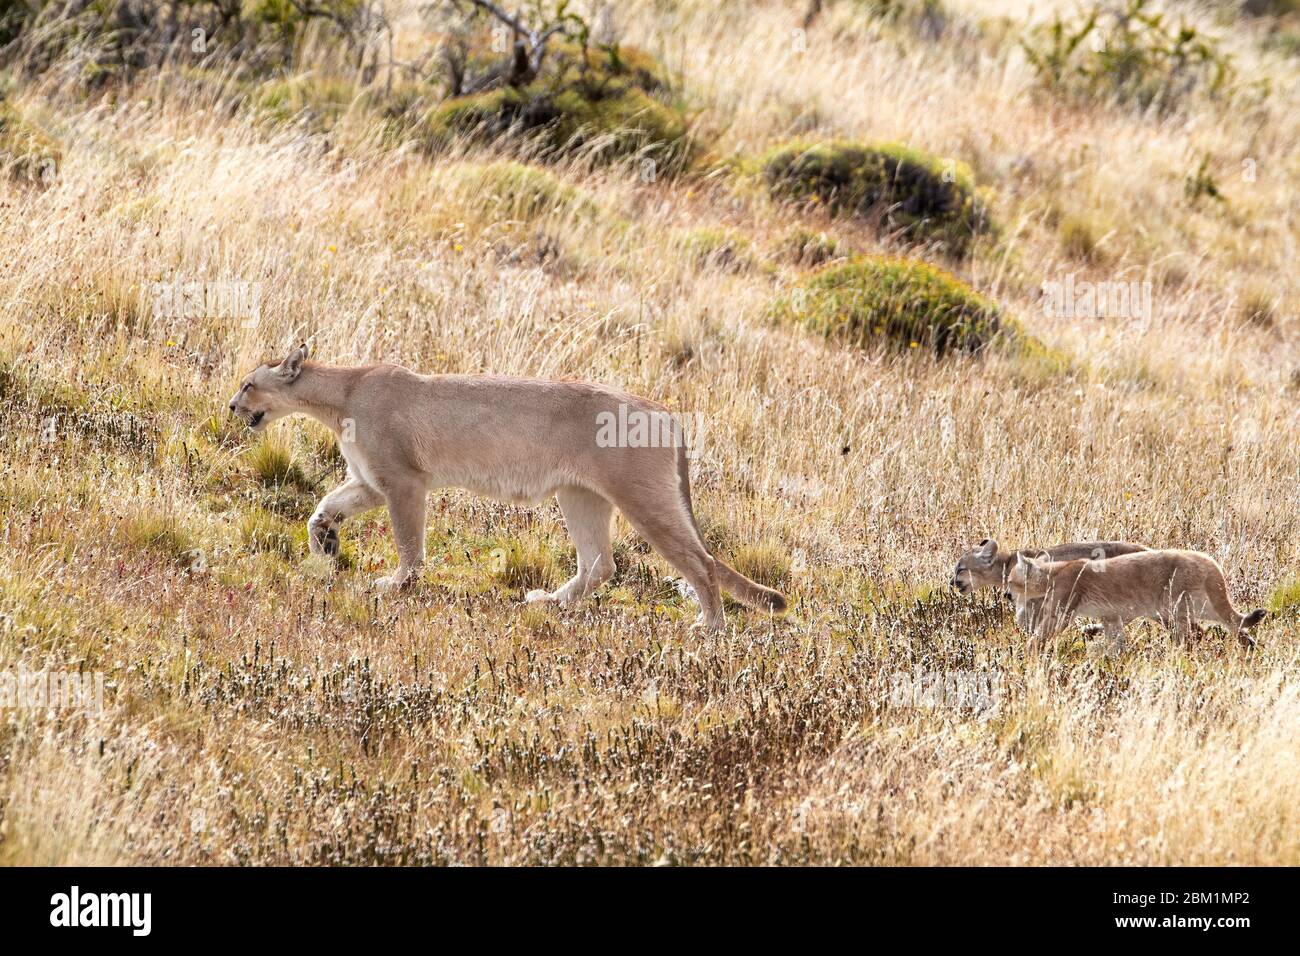 Puma mother and young cubs walking through short grass on a hill side.  Also called cougar or mountain lion. Stock Photo